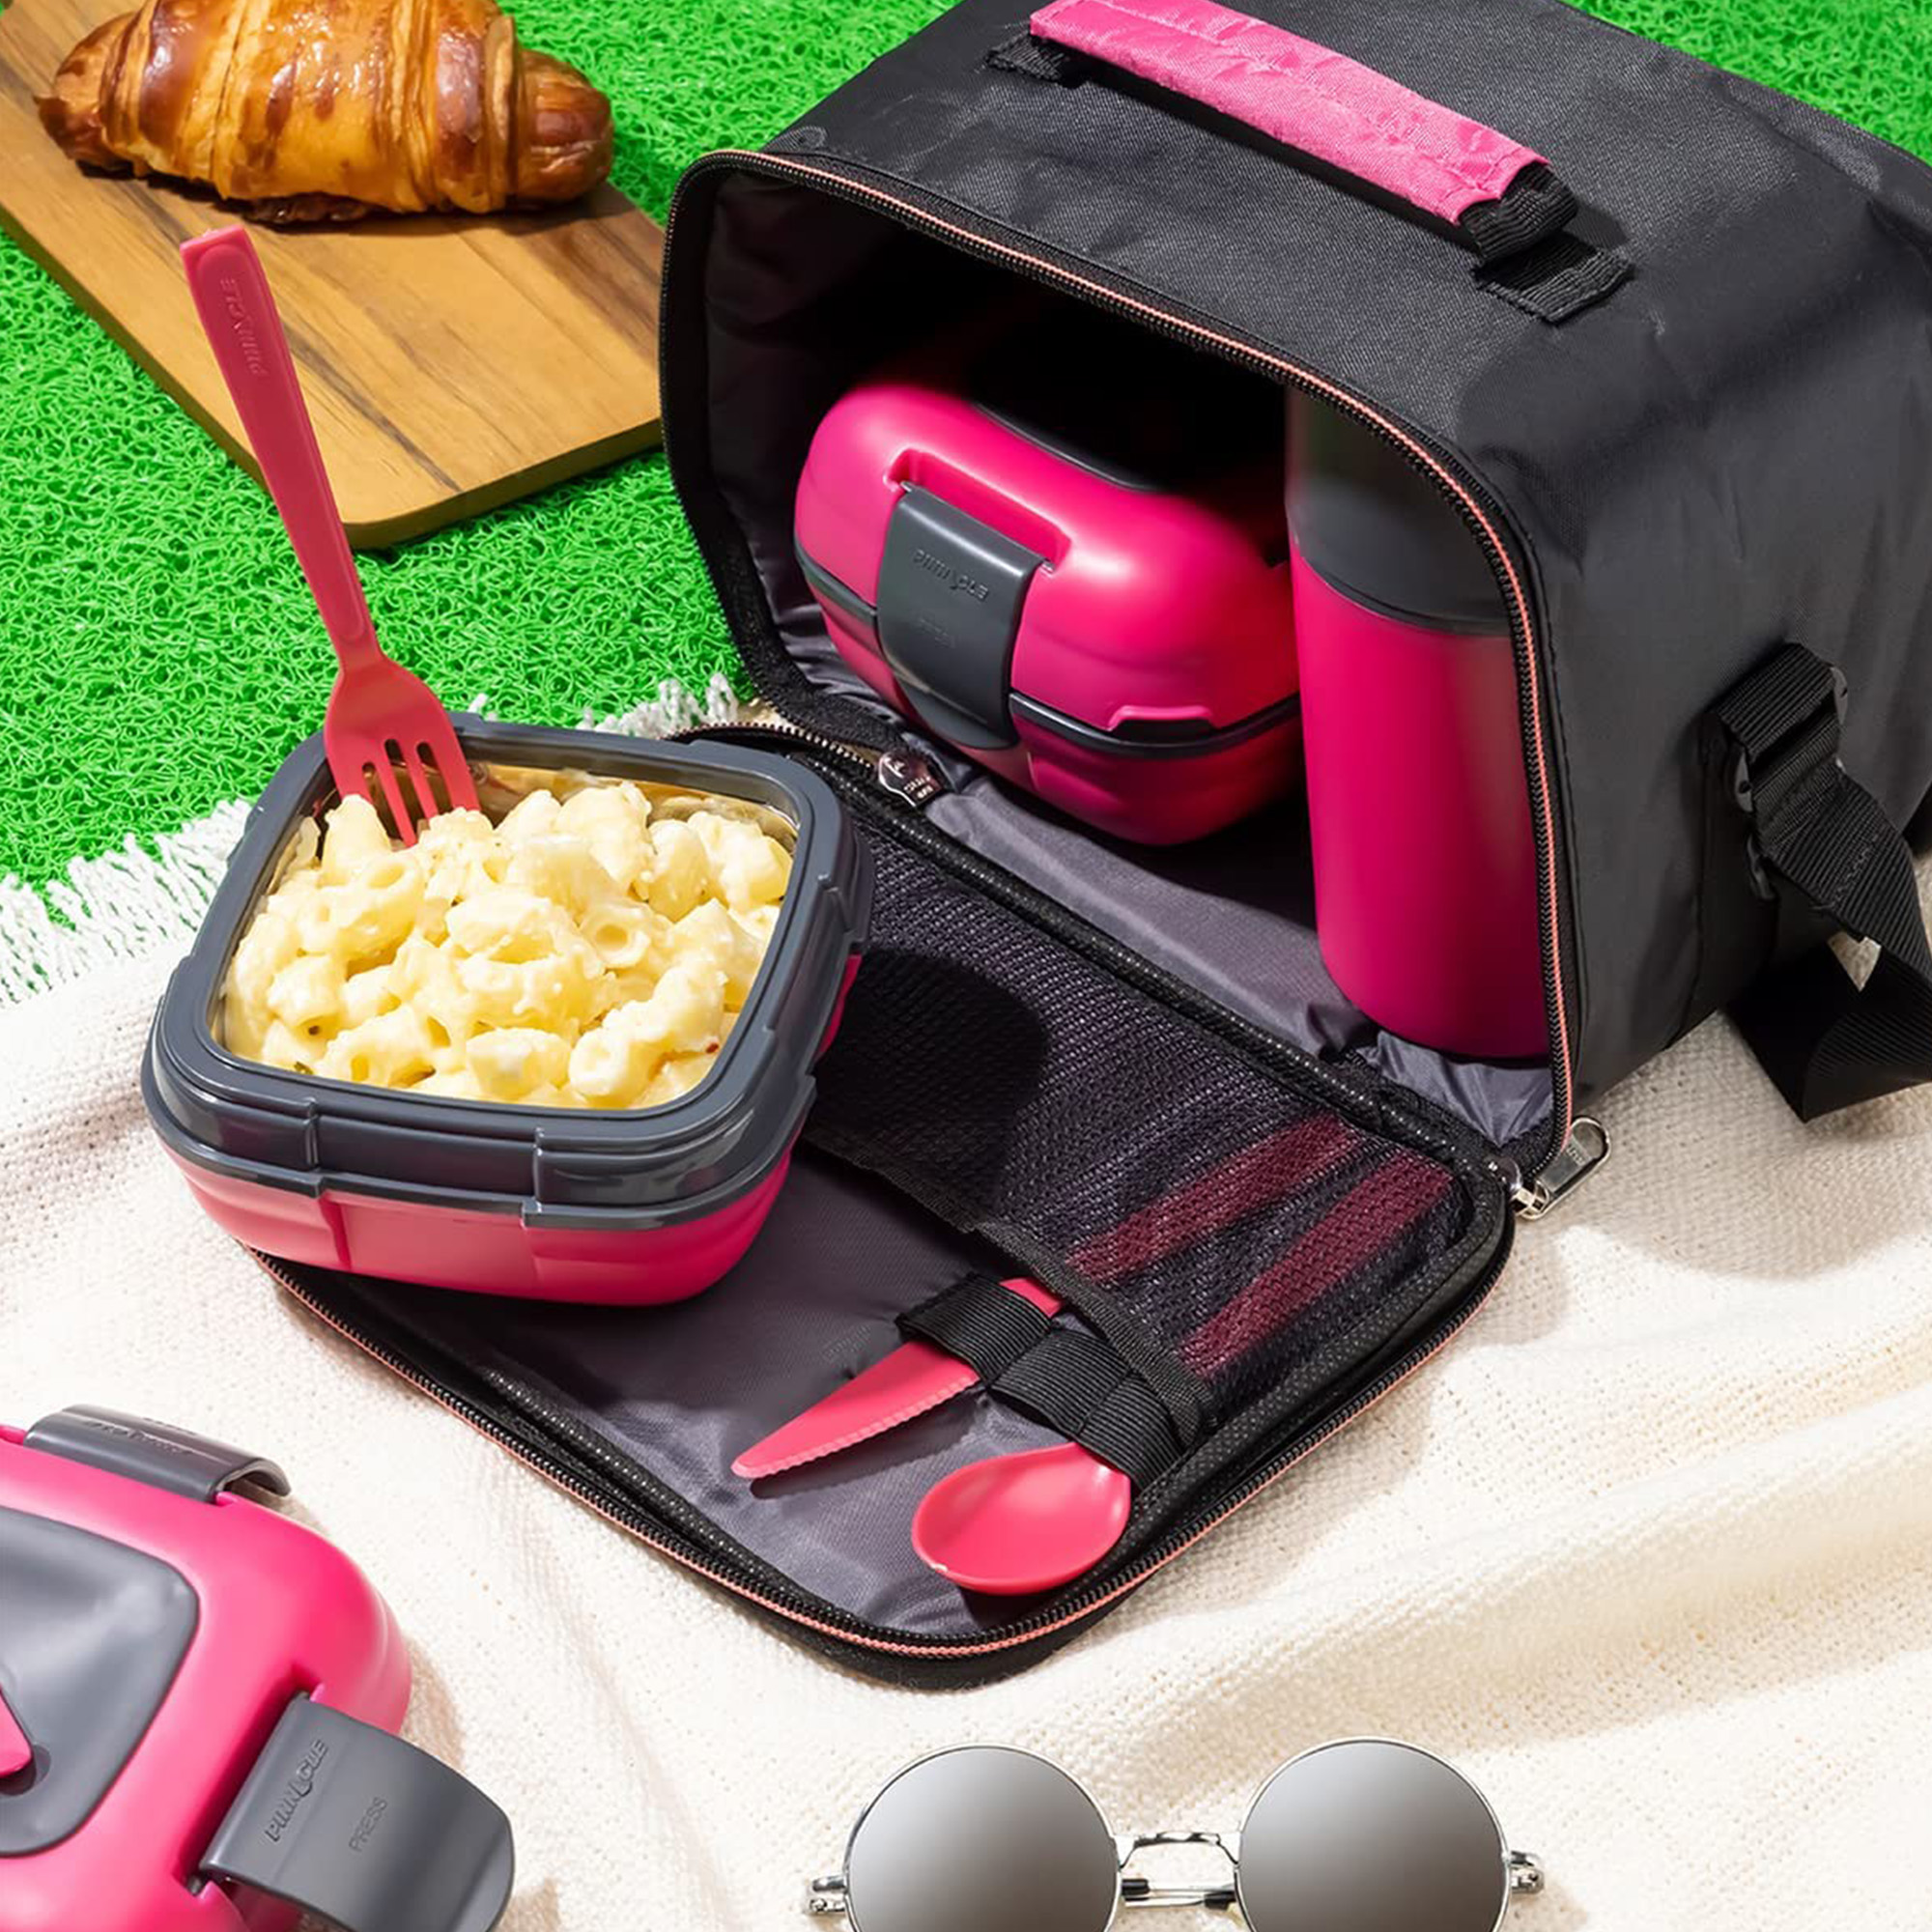 Pinnacle Thermoware Thermal Lunch Box Set Lunch Containers for Adults & Kids, Pink - image 2 of 9